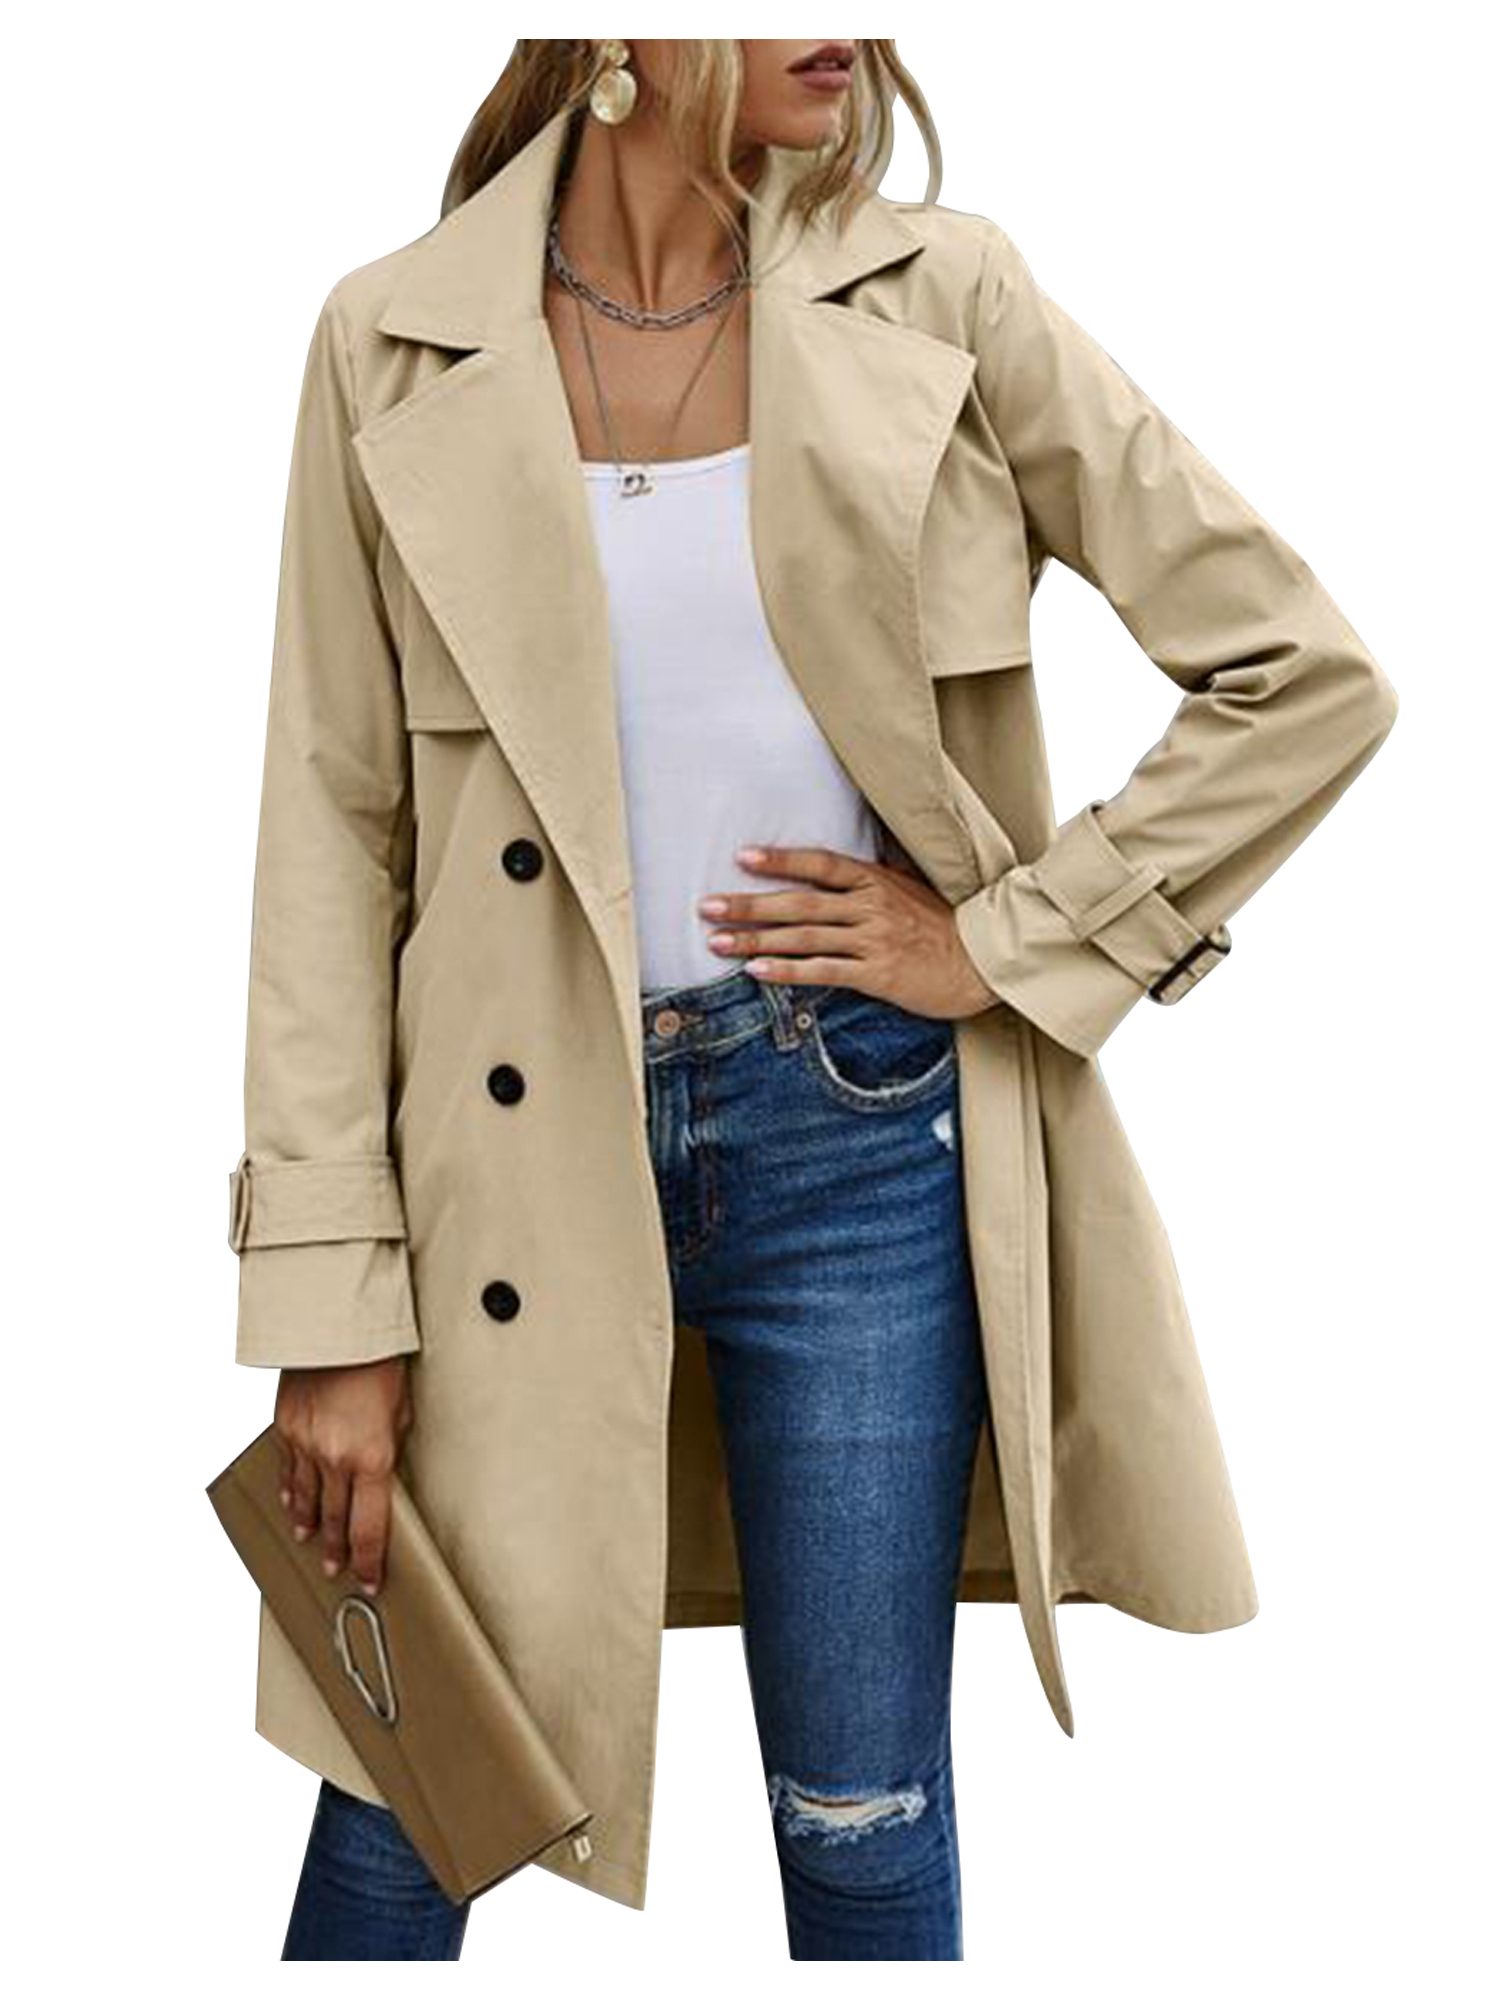 Spring hue Women Jacket Long Sleeve Lapel Double Breasted Belted Trench Coat - image 2 of 5